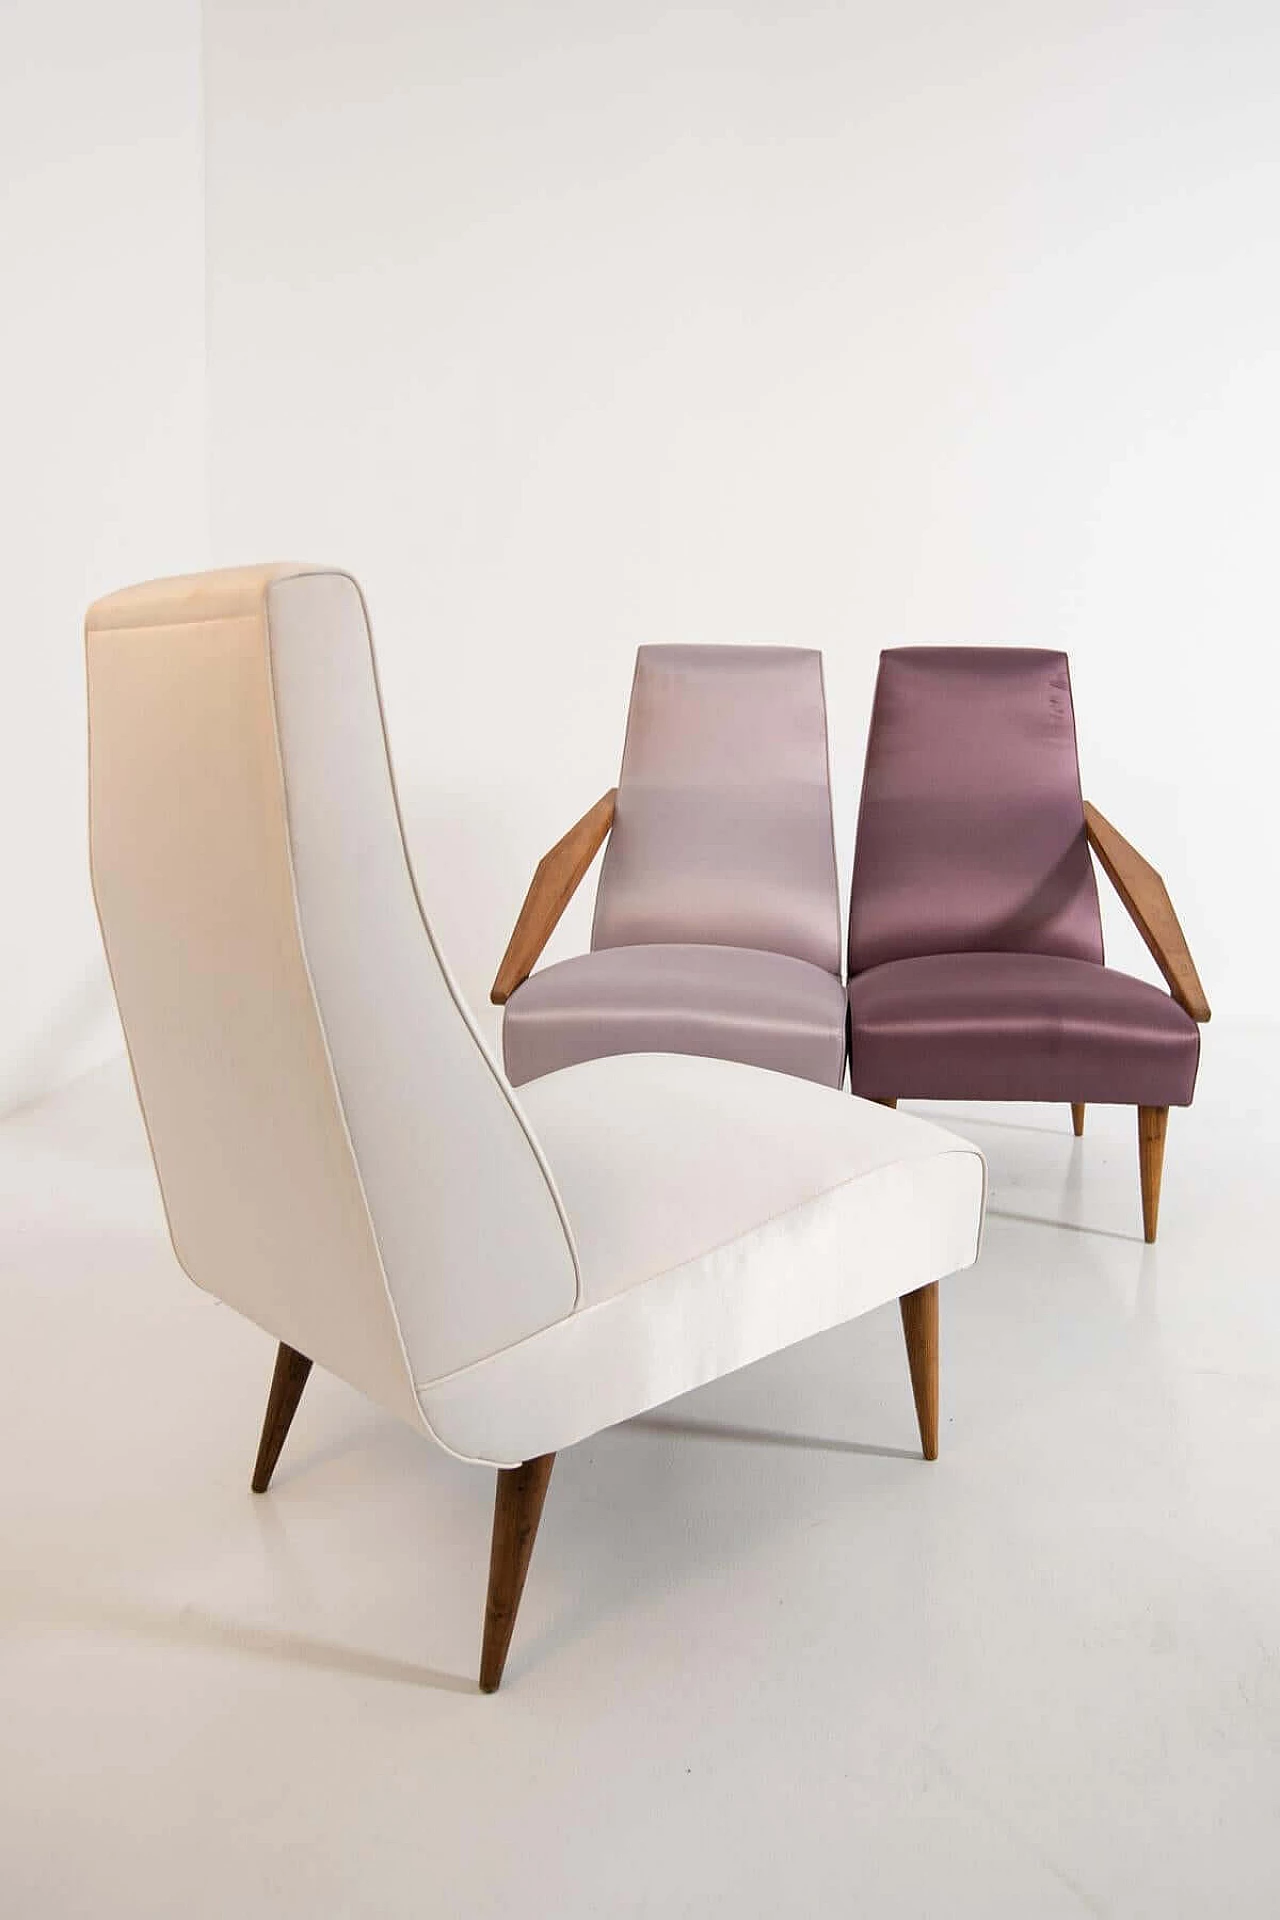 3 Armchairs attributed to Gio Ponti for Boucher & Fils, 1950s 1403346